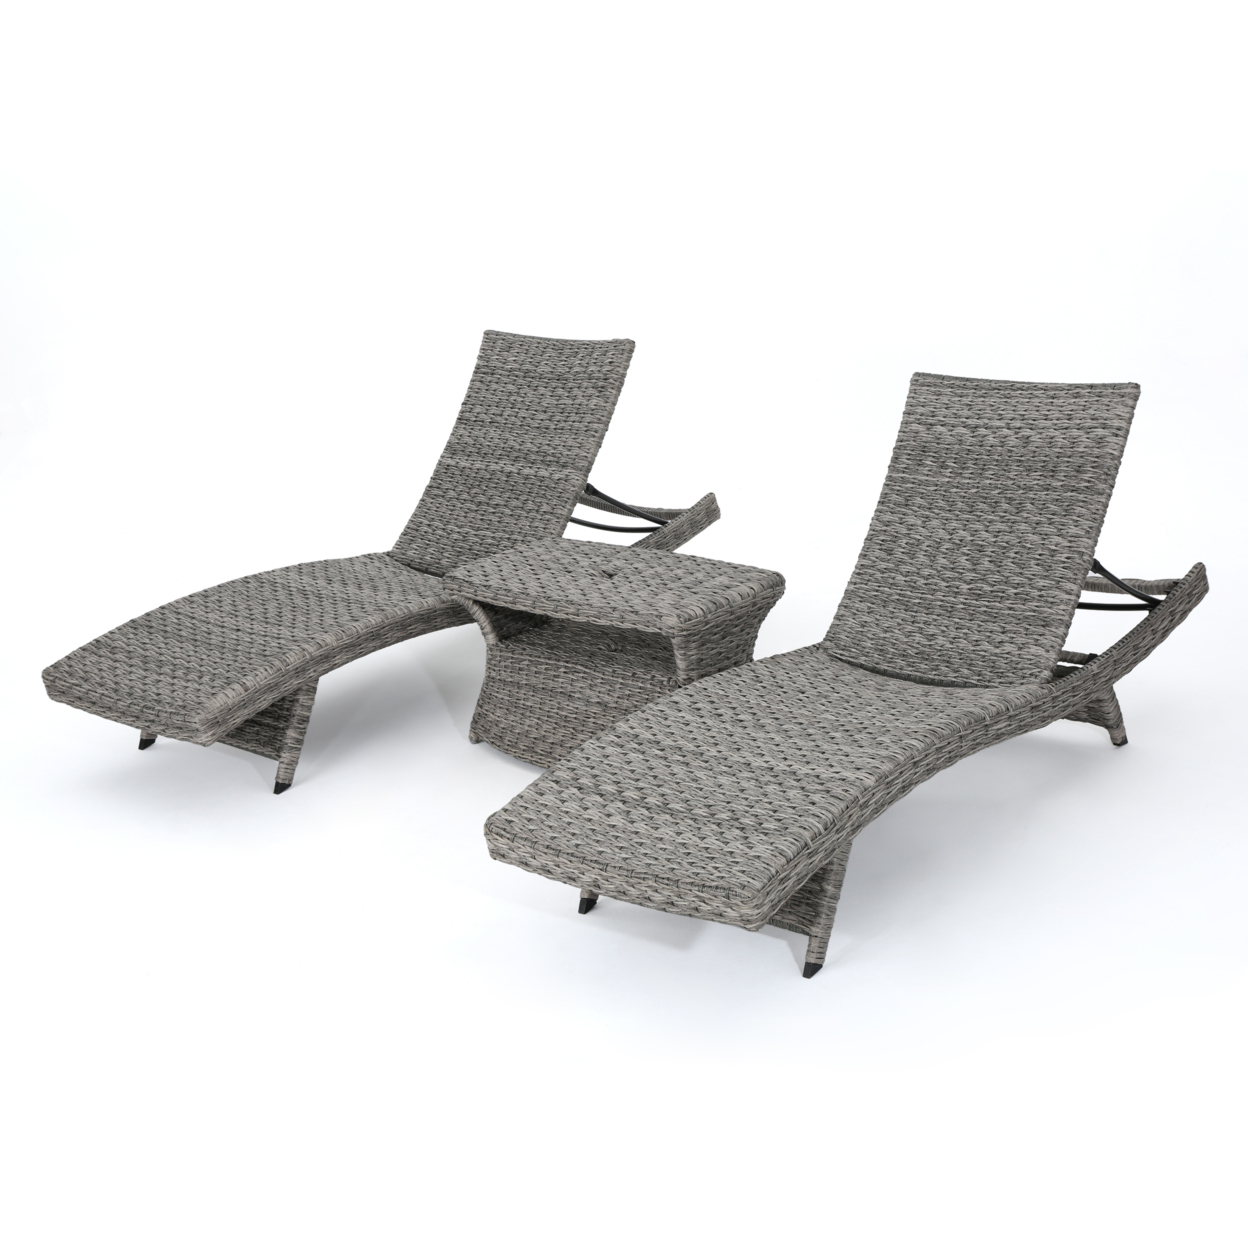 Knightley Outdoor 3 Piece Gray Wicker Armless Chaise Lounges With Side Table - Foldable Table, Gray